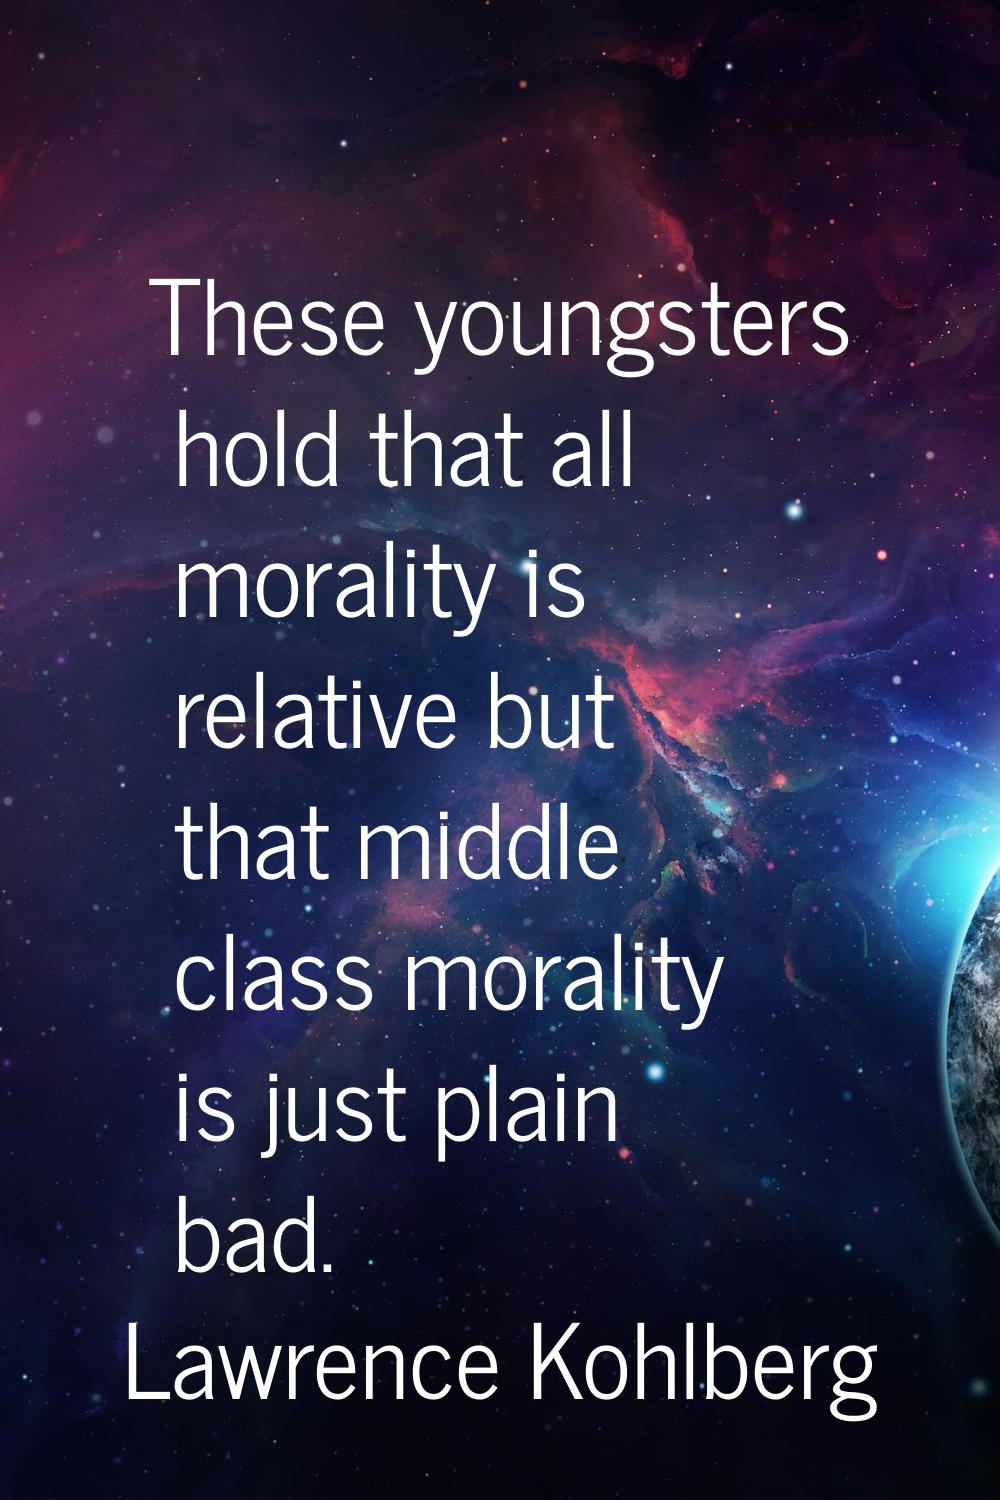 These youngsters hold that all morality is relative but that middle class morality is just plain ba